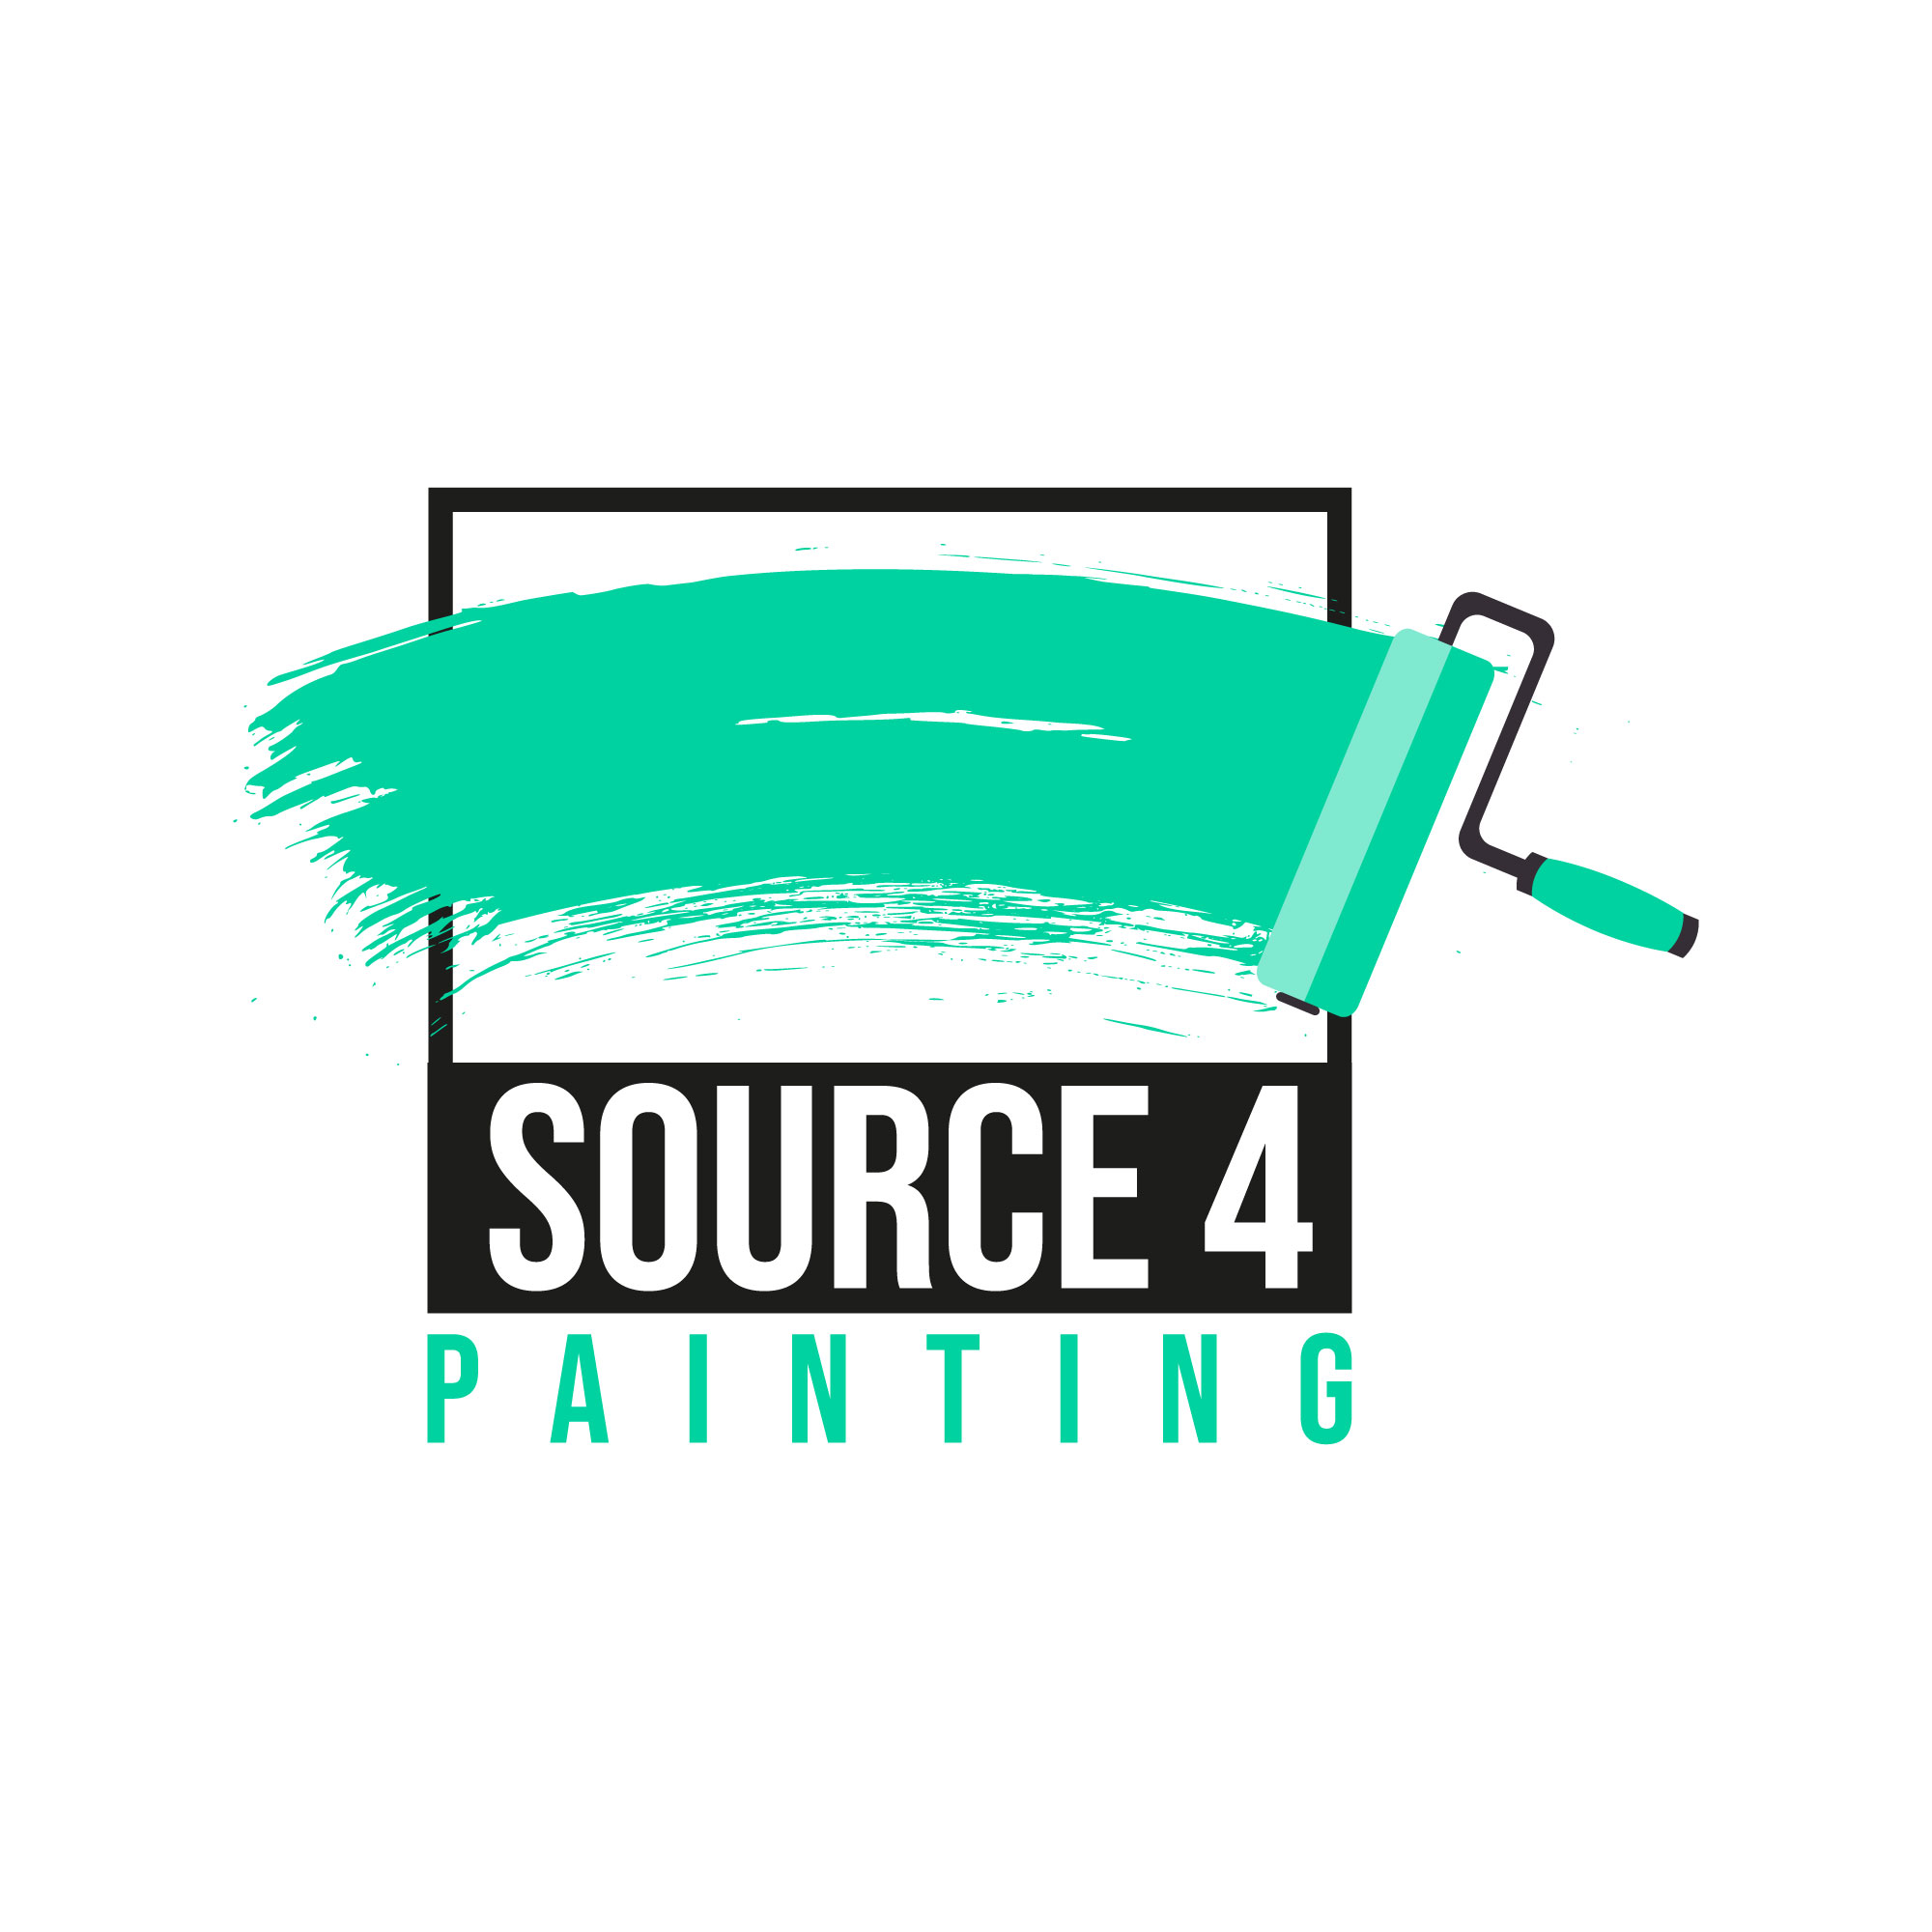 Source 4 Painting